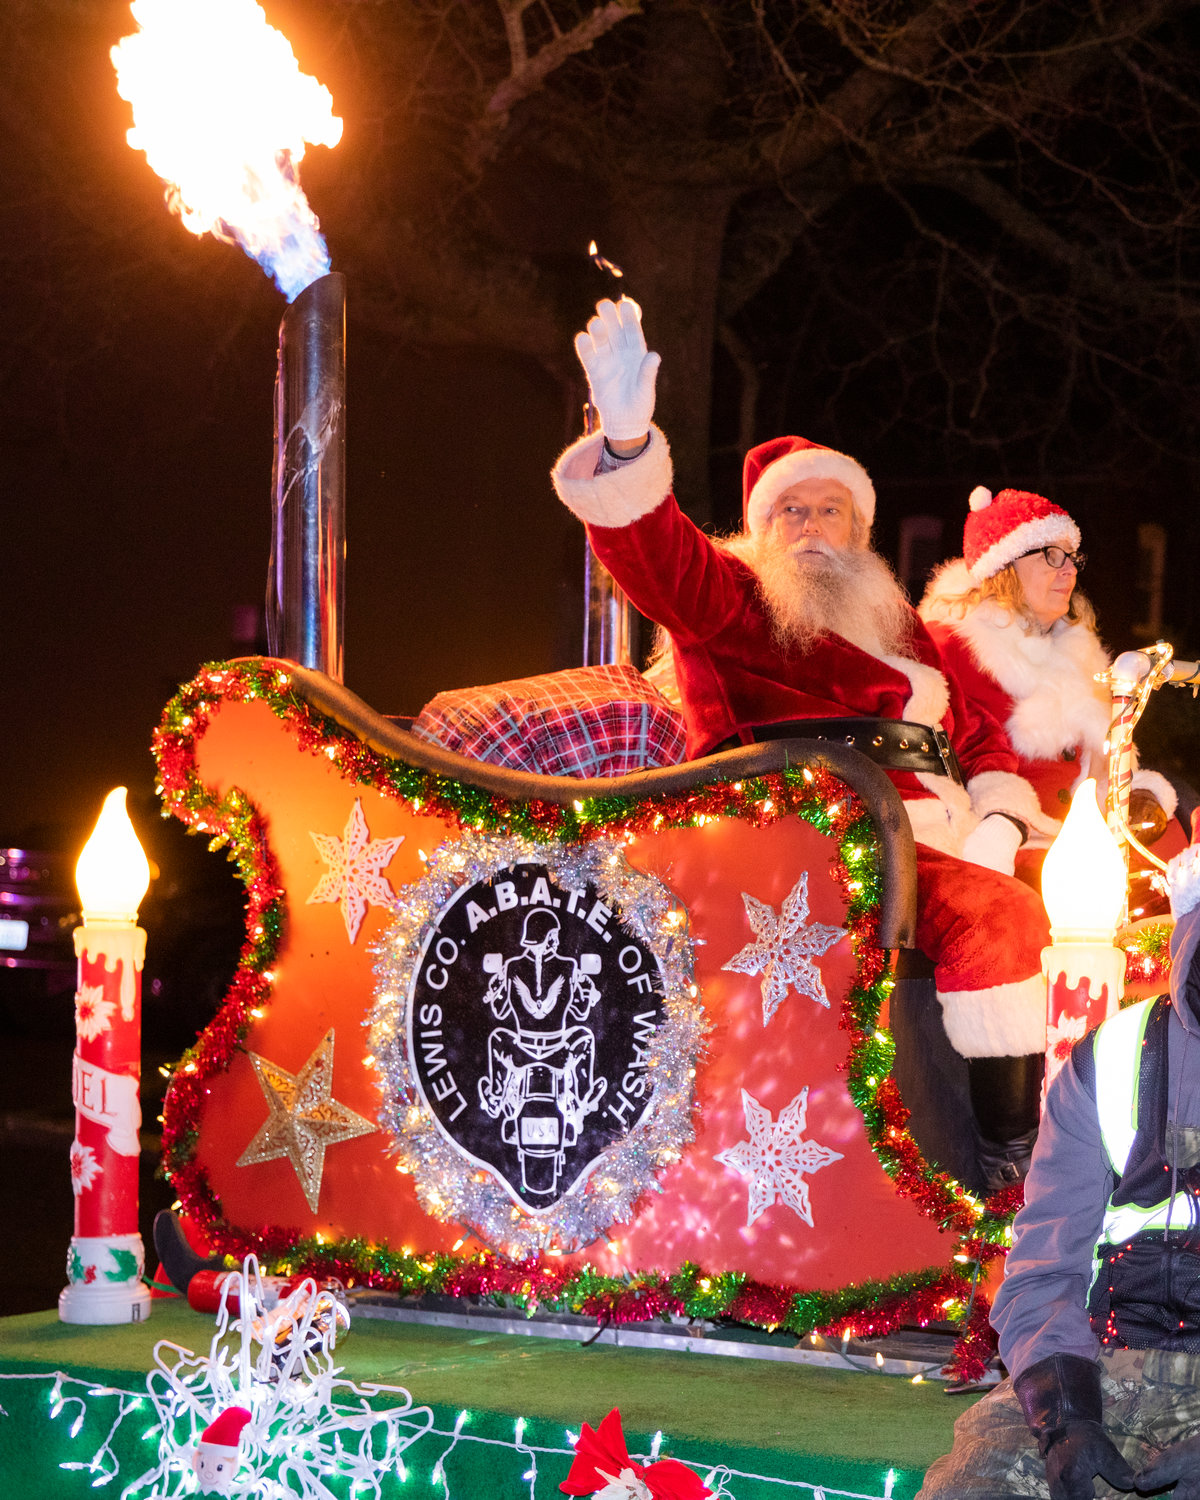 Santa waves as flames burst from the Lewis County A.B.A.T.E (A Brotherhood Against Totalitarian Enactments) float Saturday night in downtown Centralia.